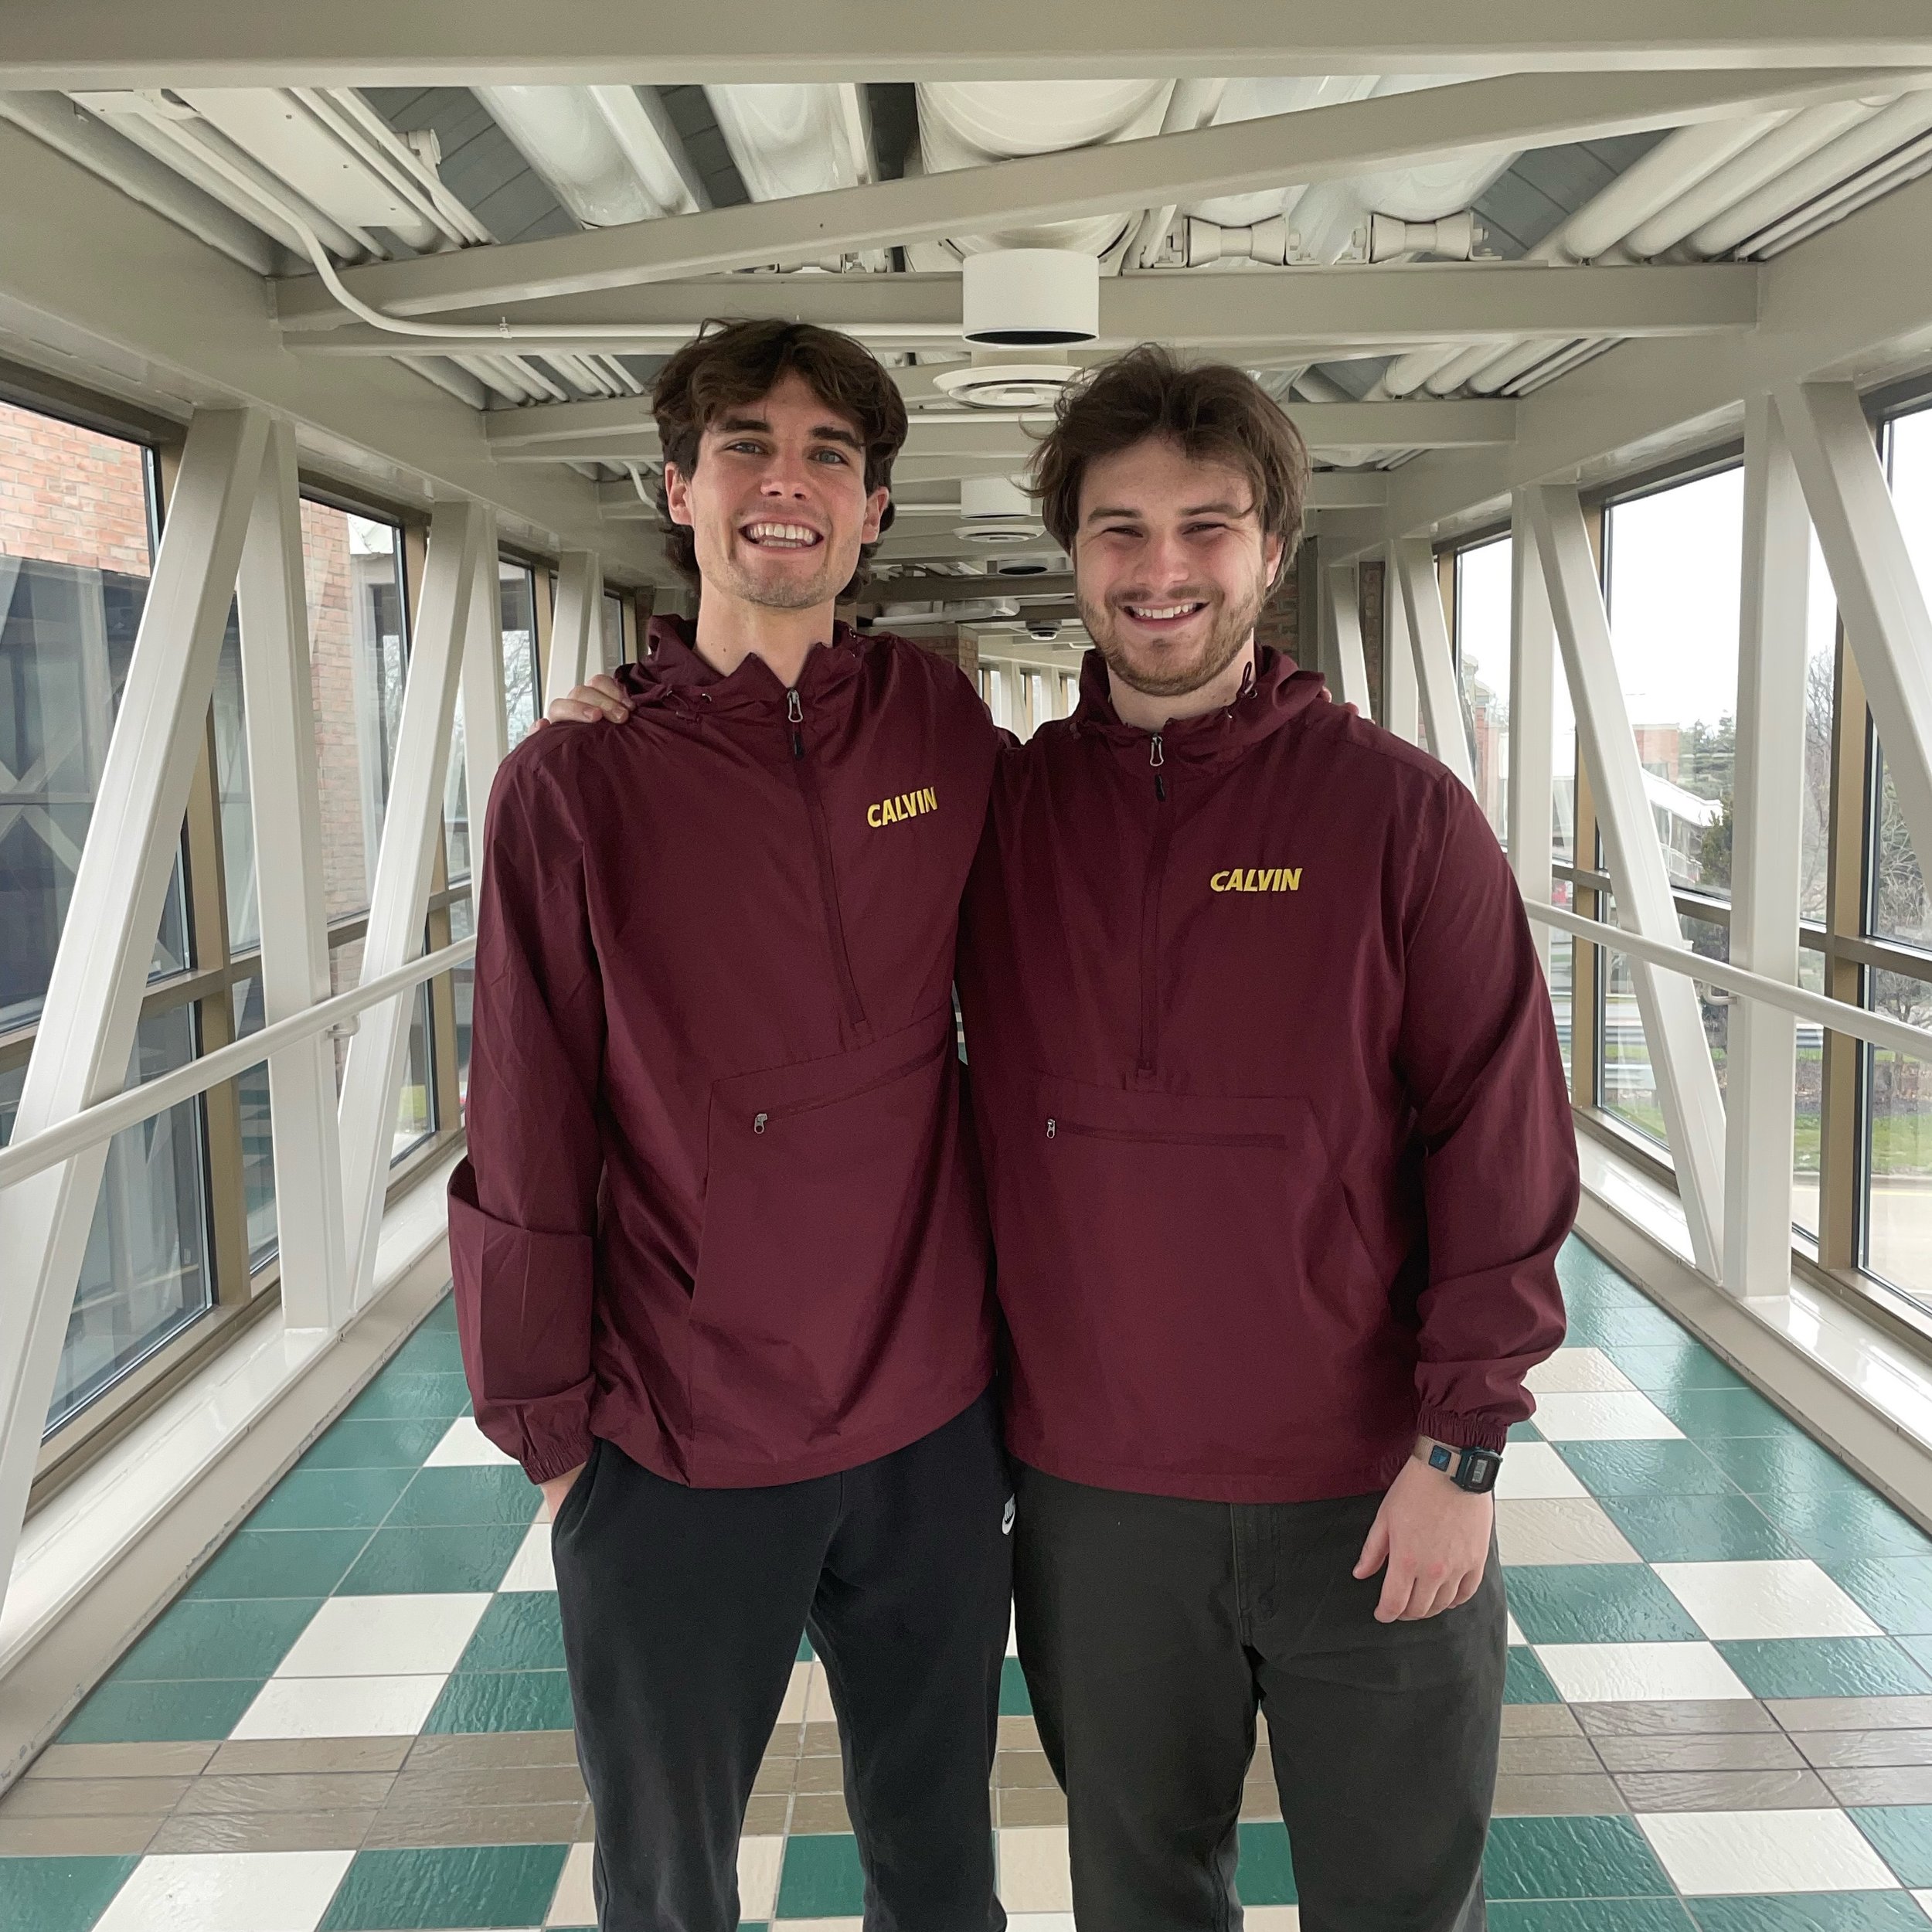 Congratulations to Tyler VerMerris &amp; Ethan VanOrman! They will be serving as next year&rsquo;s Student Body President and Vice-President. Thank you to the record breaking 1682 students that voted, we appreciate you so much!